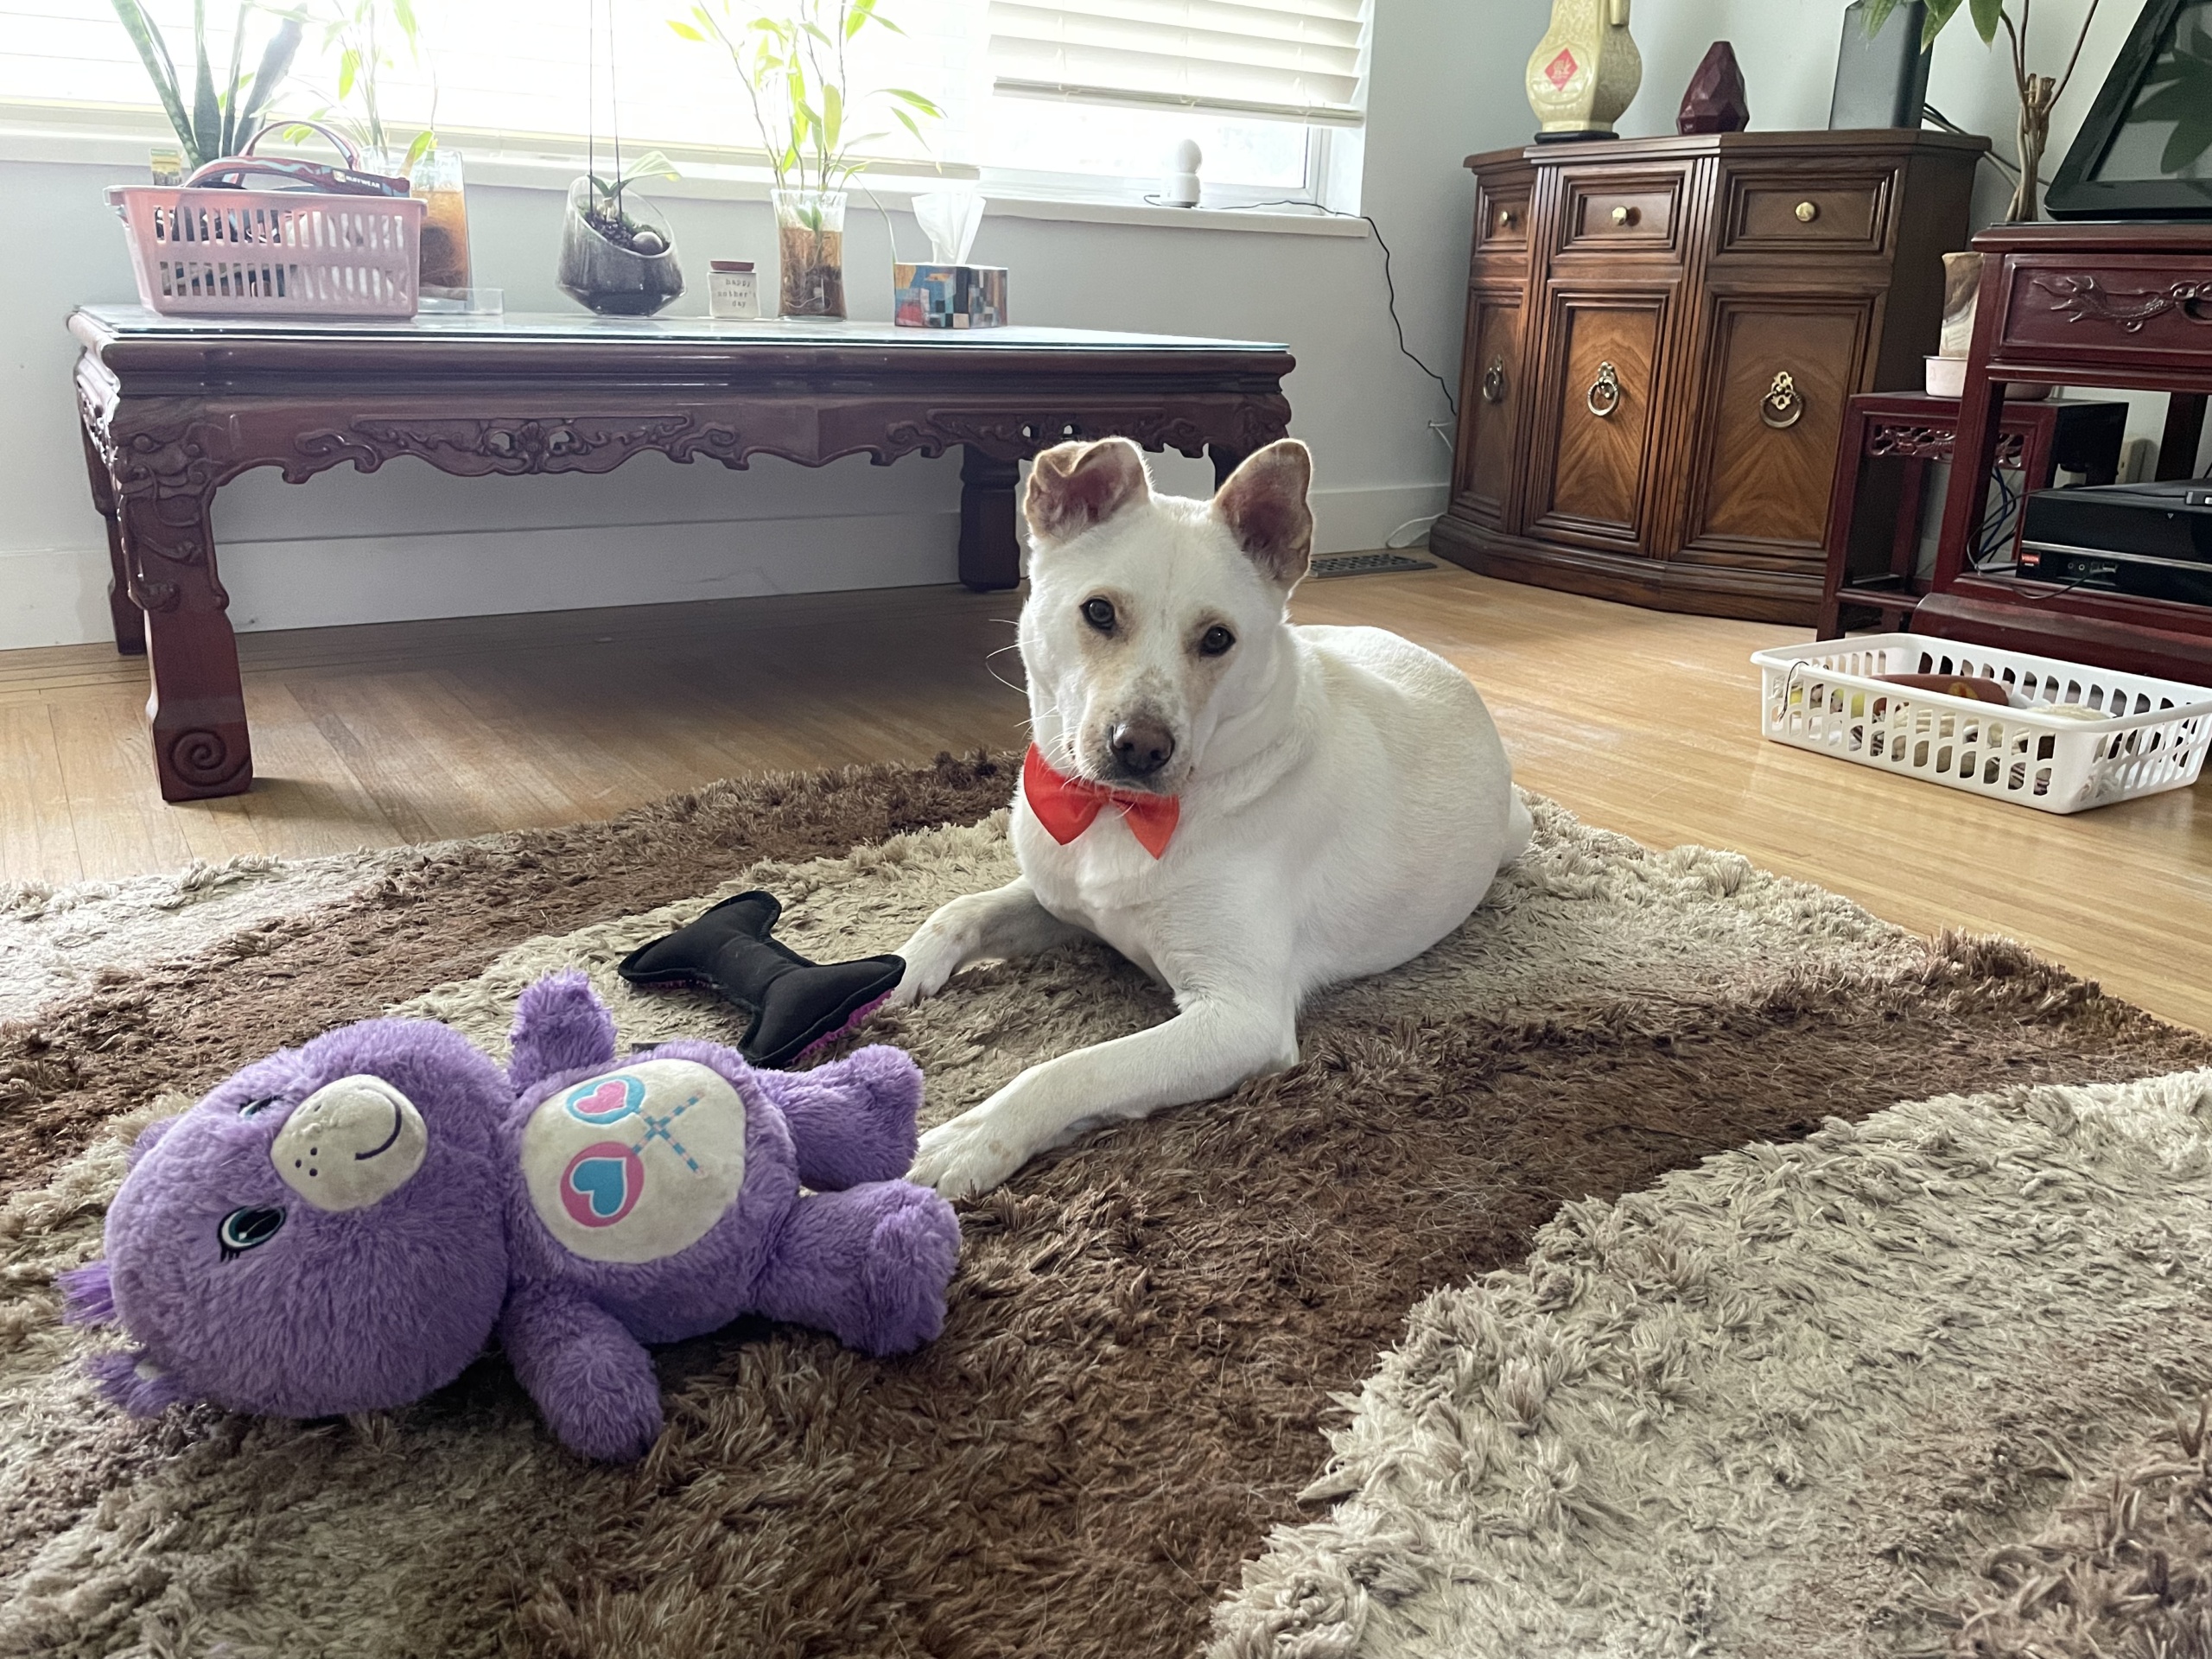 Kobe laying down with his toys, wearing a bowtie